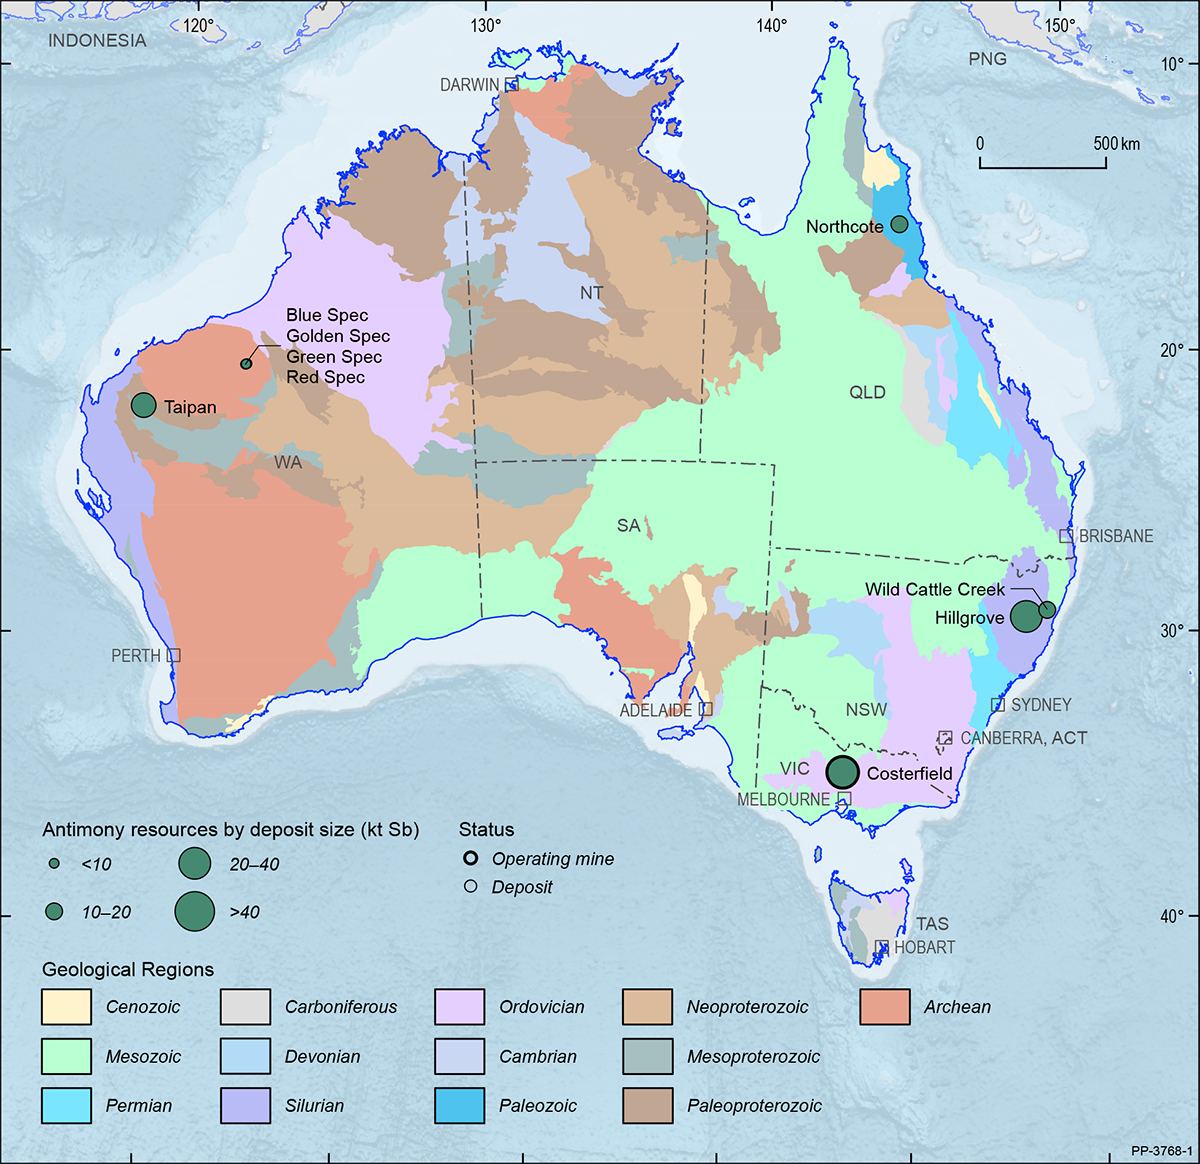 A map showing the Australian continent shaded by the ages of the main geological provinces highlighting the geographical distribution of Australian antimony deposits and operating mines 2019.